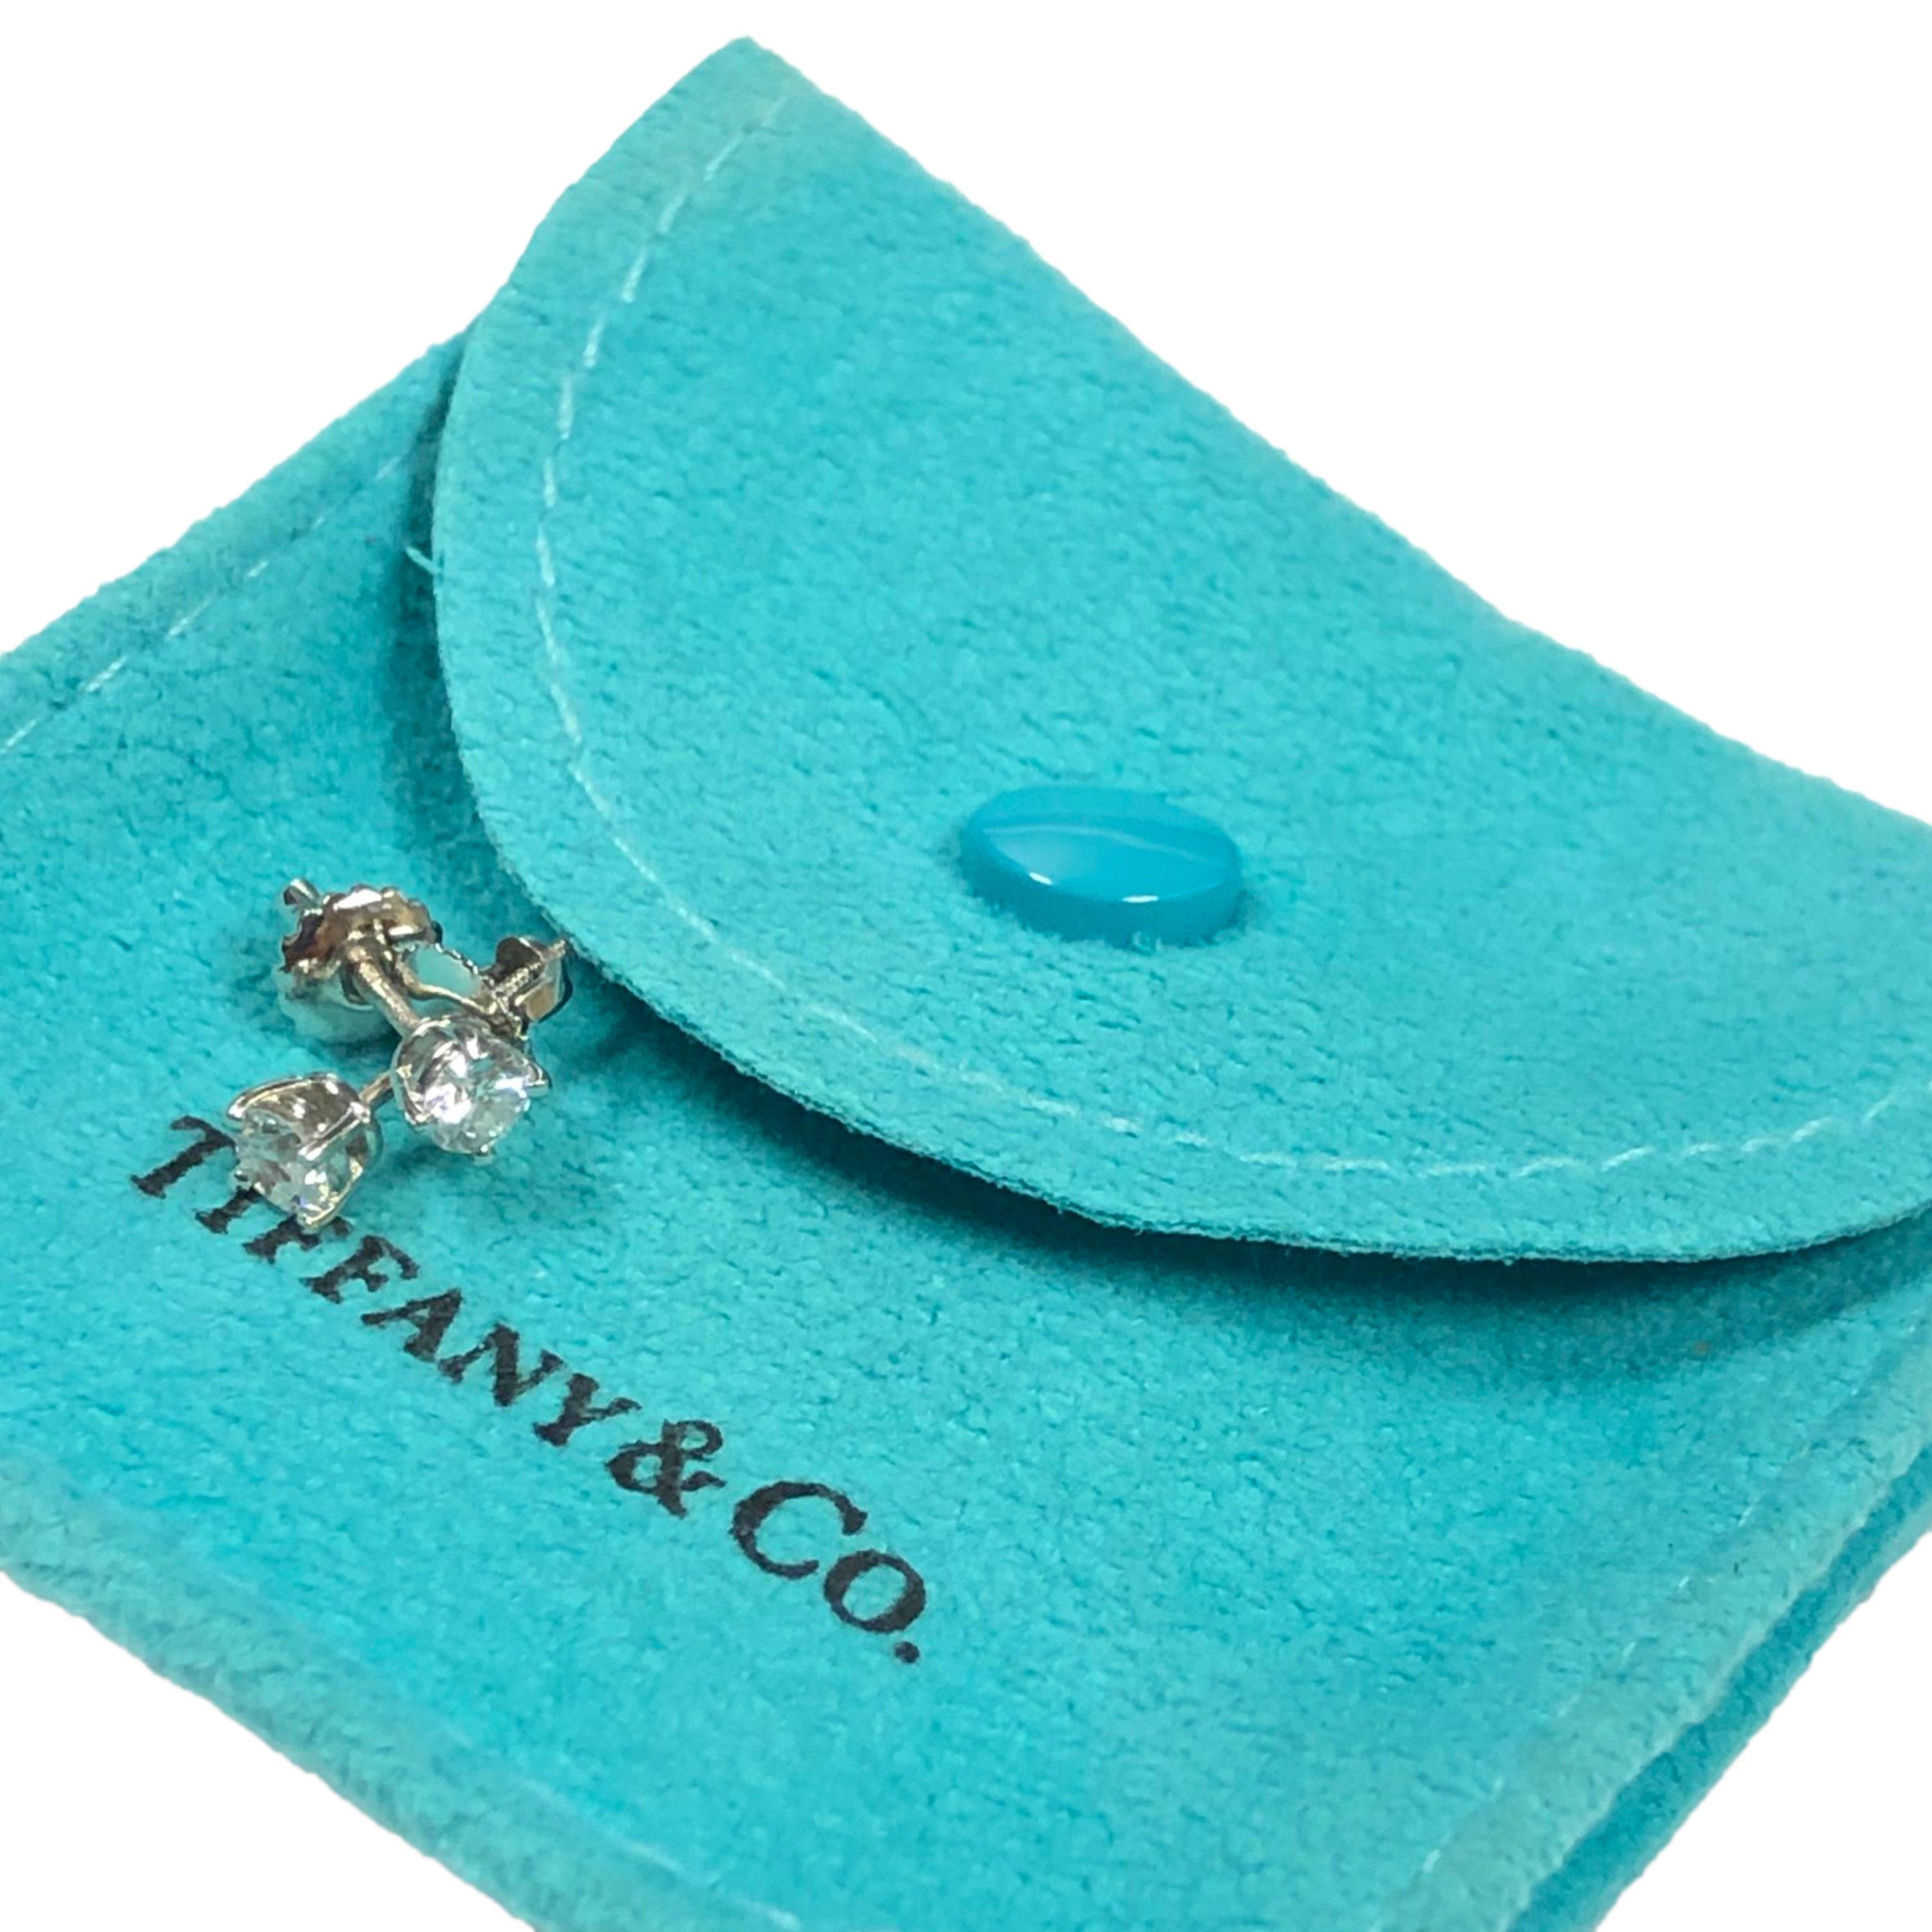 Circa 2012 Tiffany & Company Platinum and Diamond Stud Earrings, 4 Prong heads with screw backs. Round Brilliant cut Diamonds totaling .38 Carat and Grading as F - G in Color and VS in Clarity. Comes in original Tiffany Suede travel pouch. 